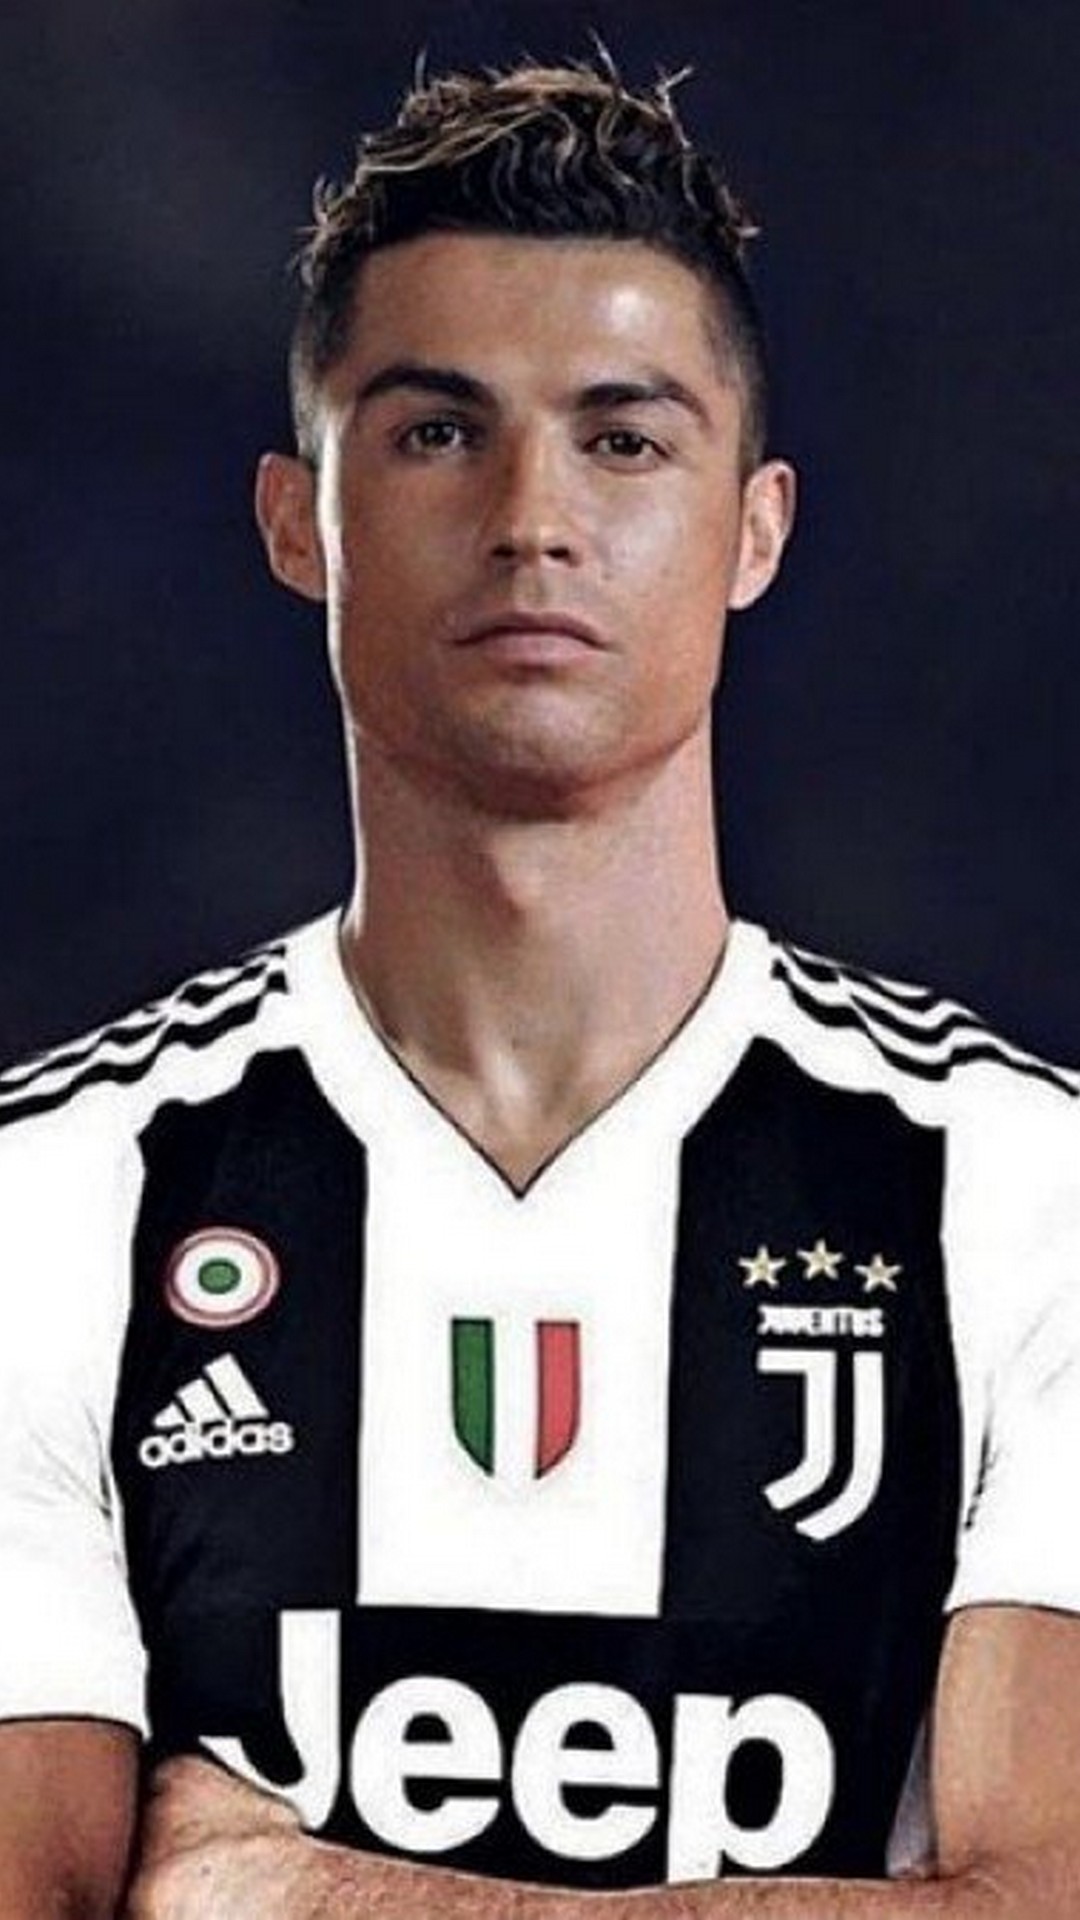 Wallpaper CR7 Juventus iPhone with image resolution 1080x1920 pixel. You can make this wallpaper for your iPhone 5, 6, 7, 8, X backgrounds, Mobile Screensaver, or iPad Lock Screen